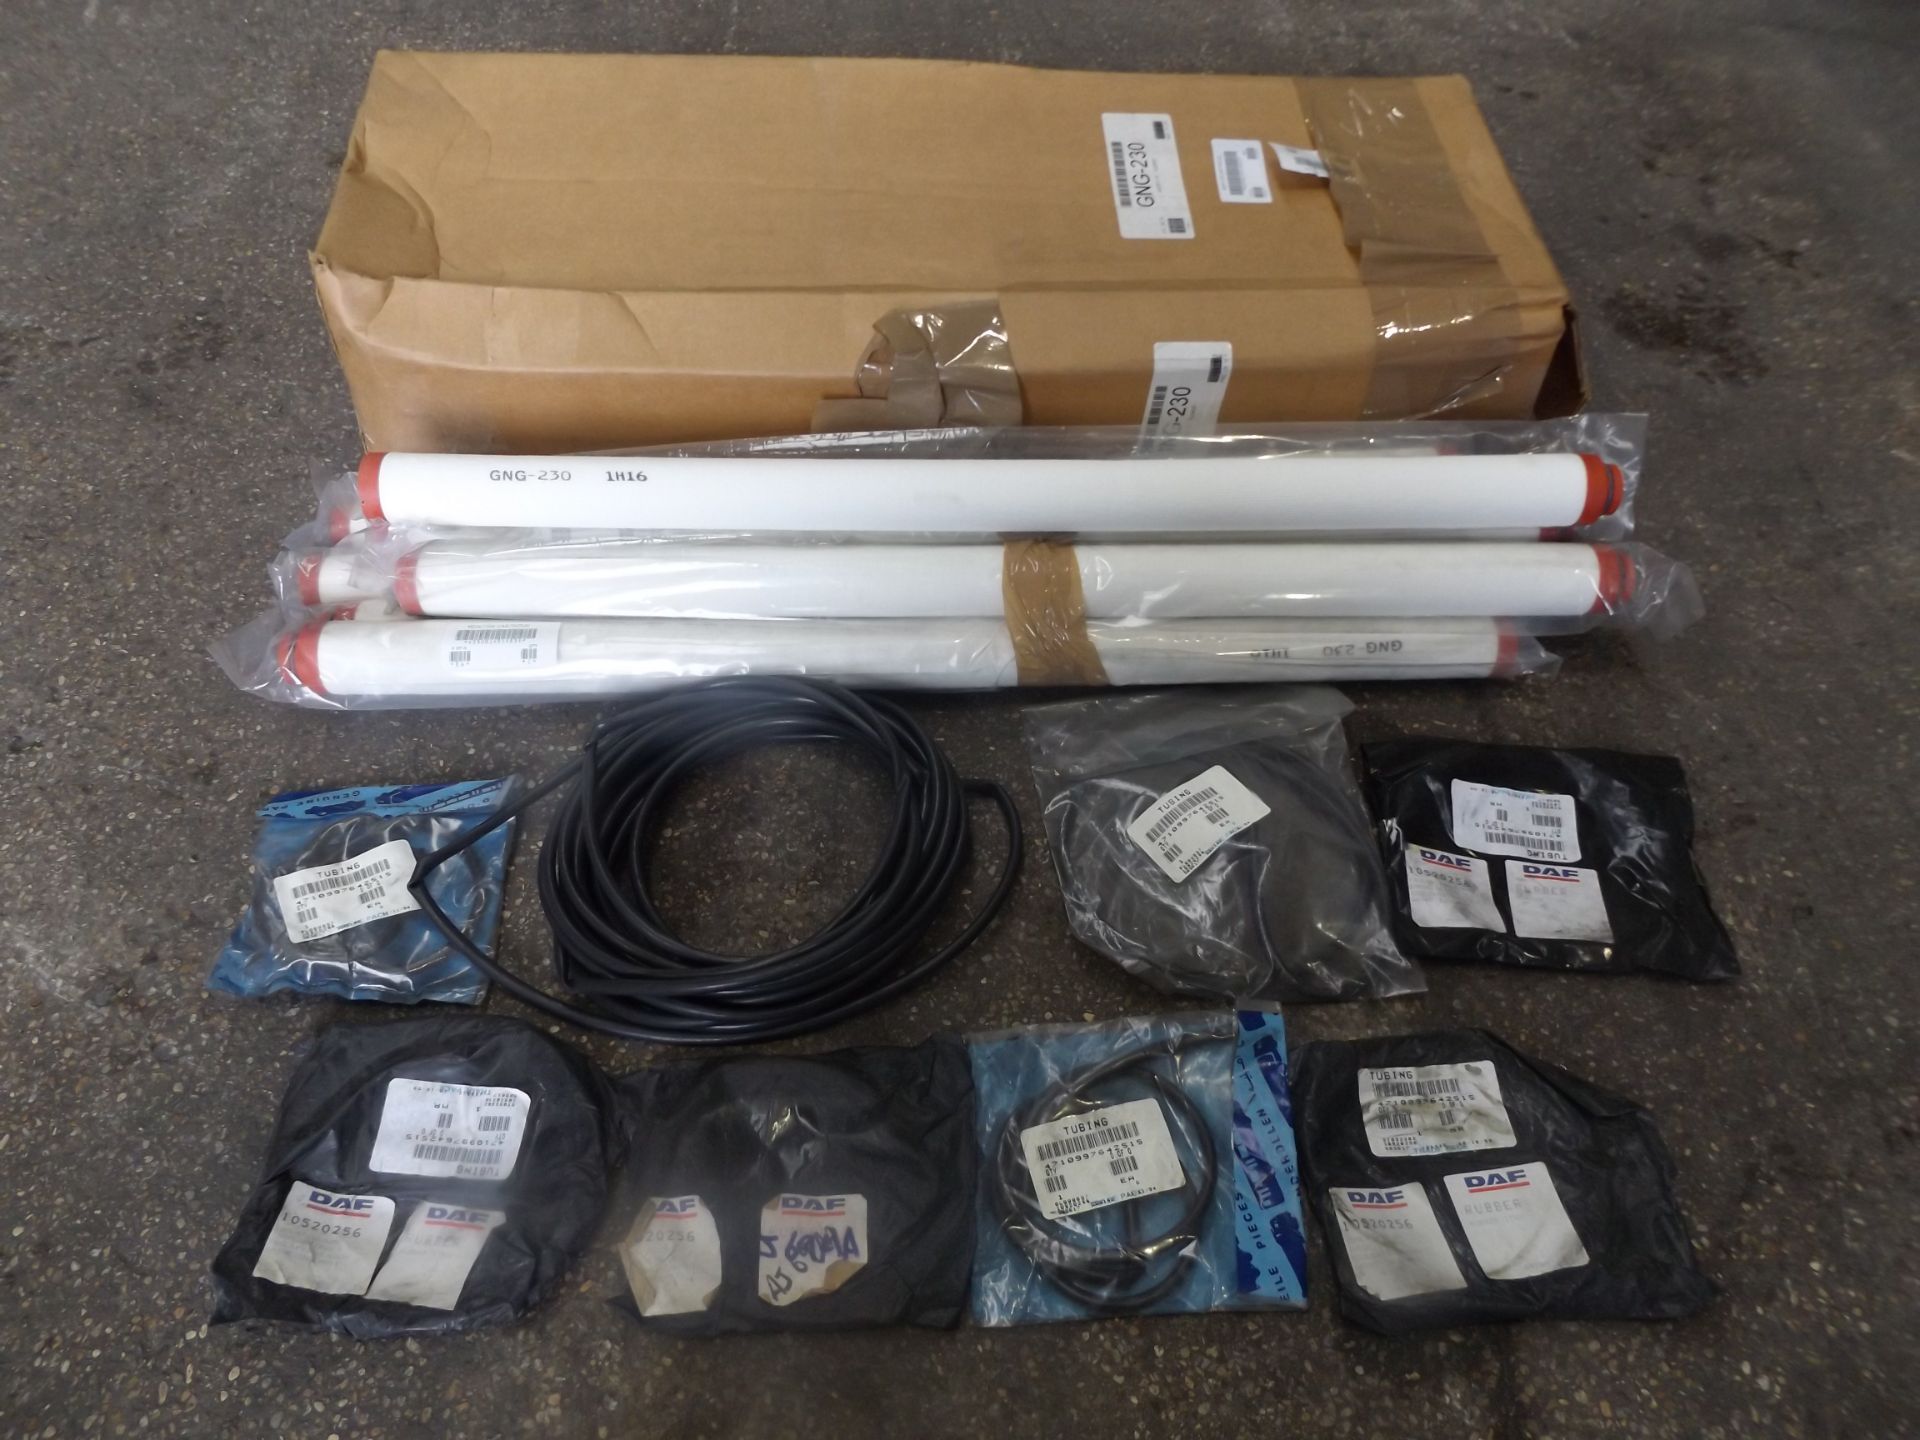 Stillage of Filter Elements and Insulation Sleeves